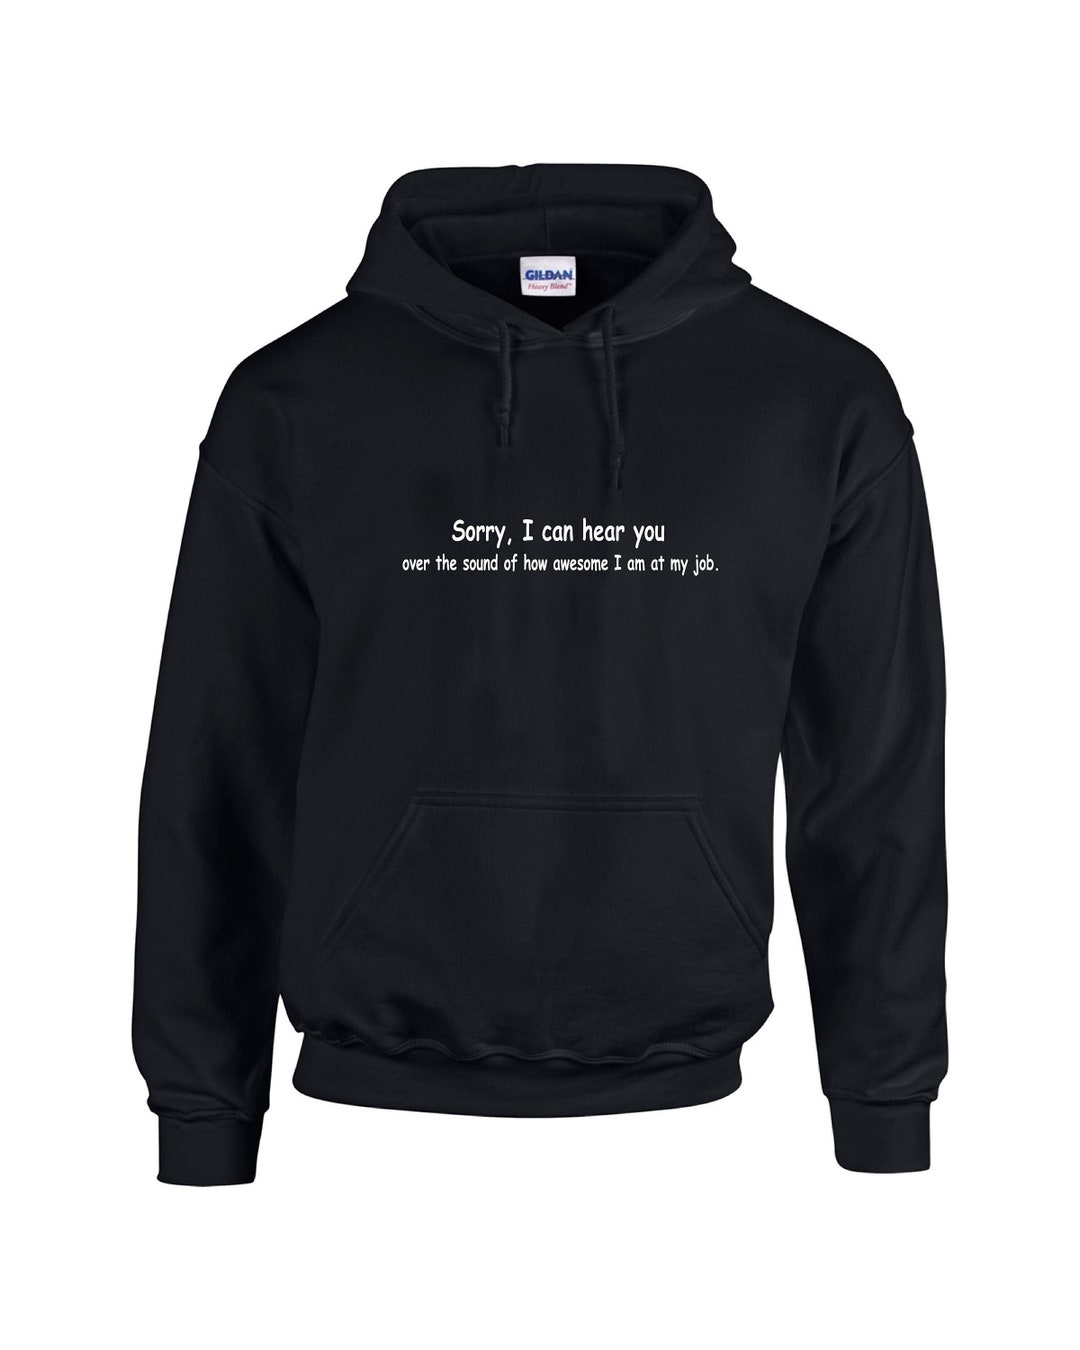 SORRY I CAN'T HEAR Statement Sweatshirt Funny Graphic - Etsy